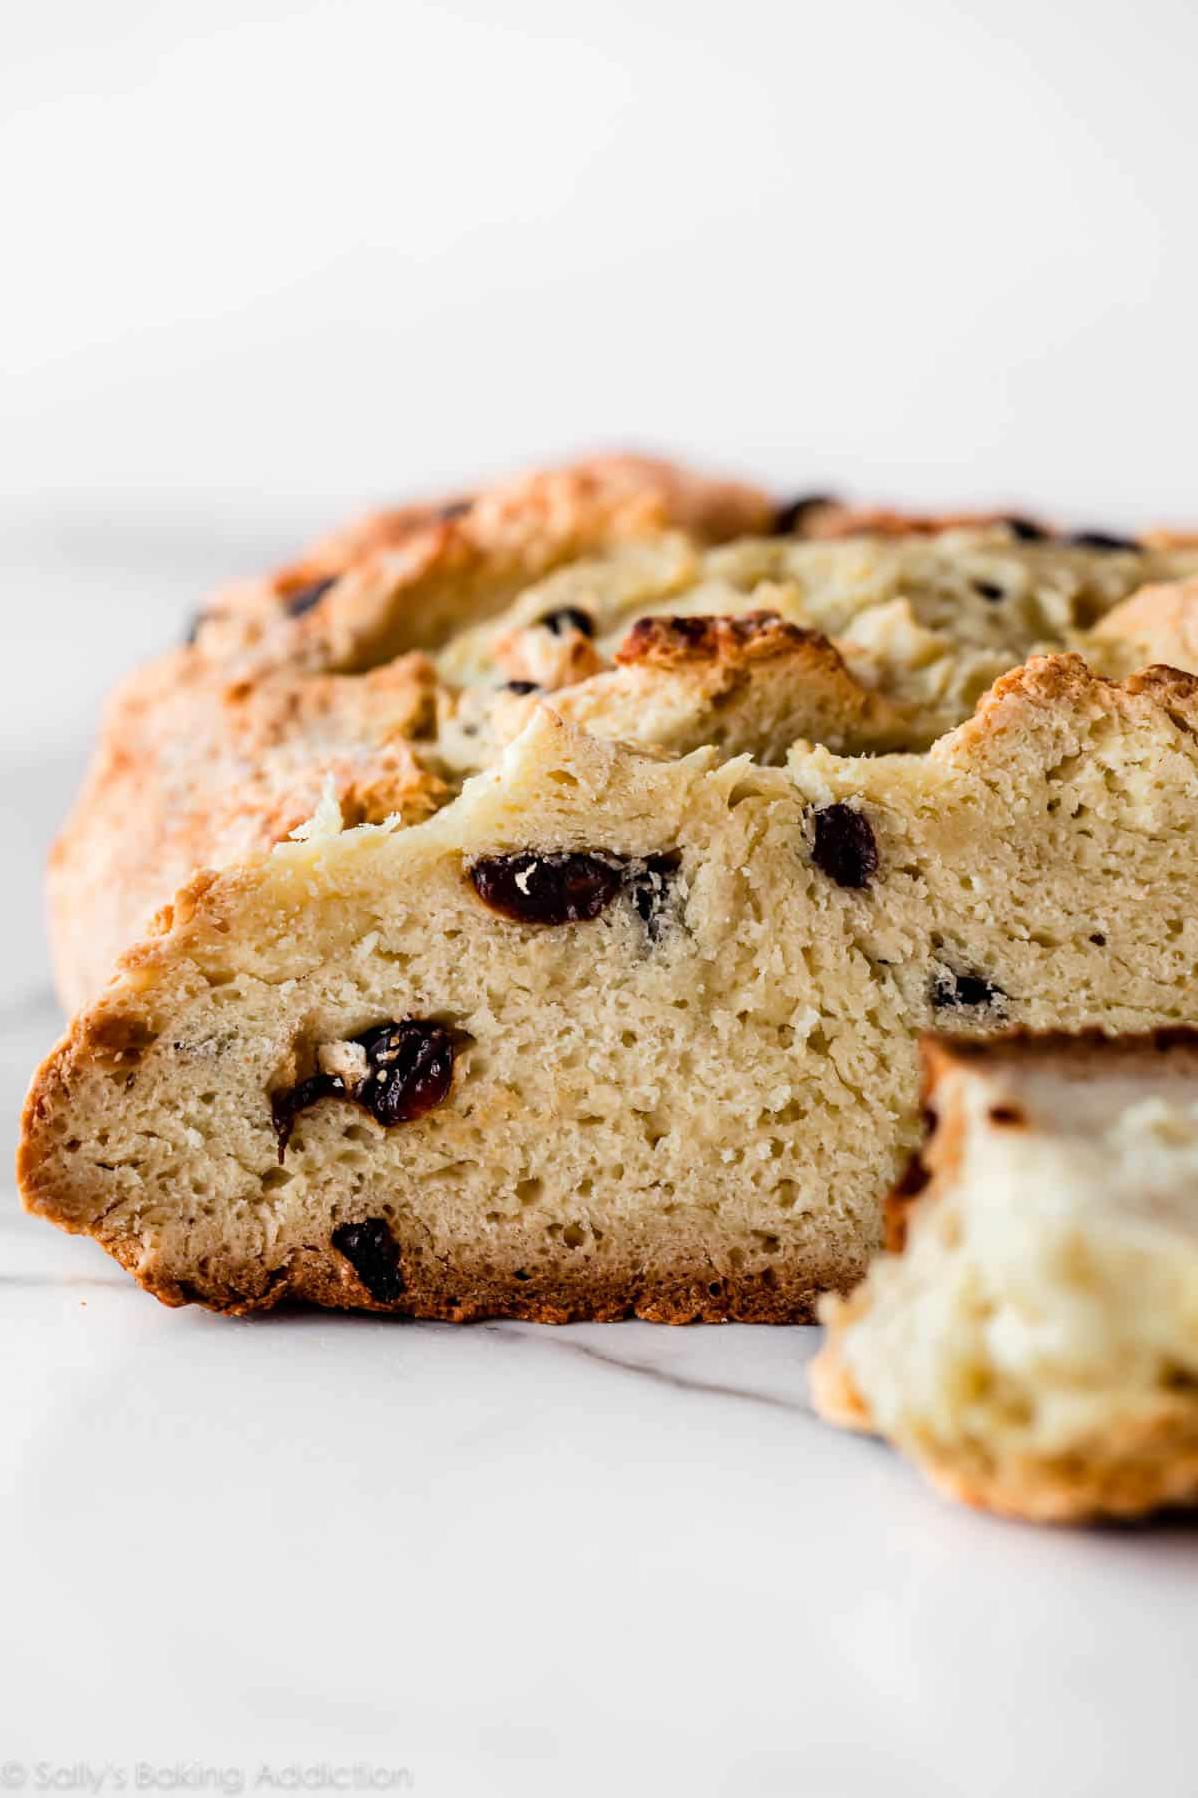  A slice of this hearty soda bread can transport you straight to the Irish countryside.